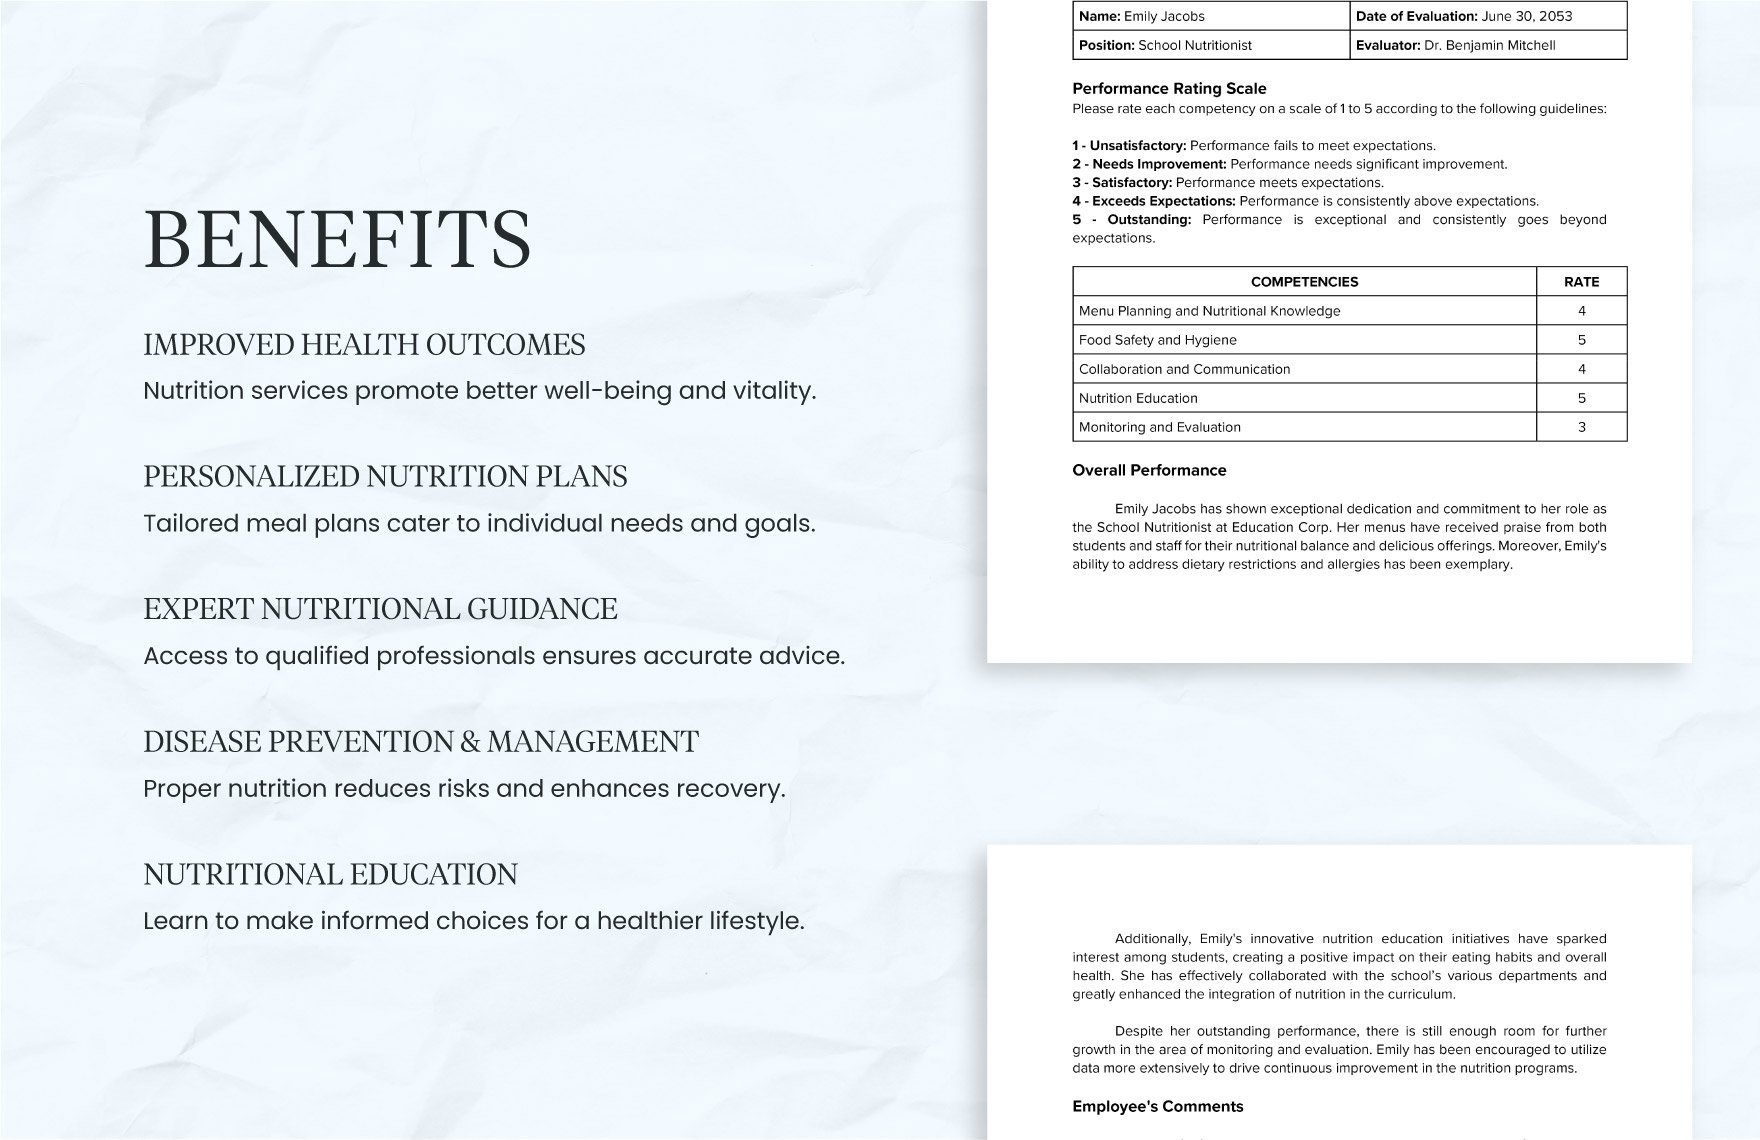 School Nutritionist Assessment Form Template